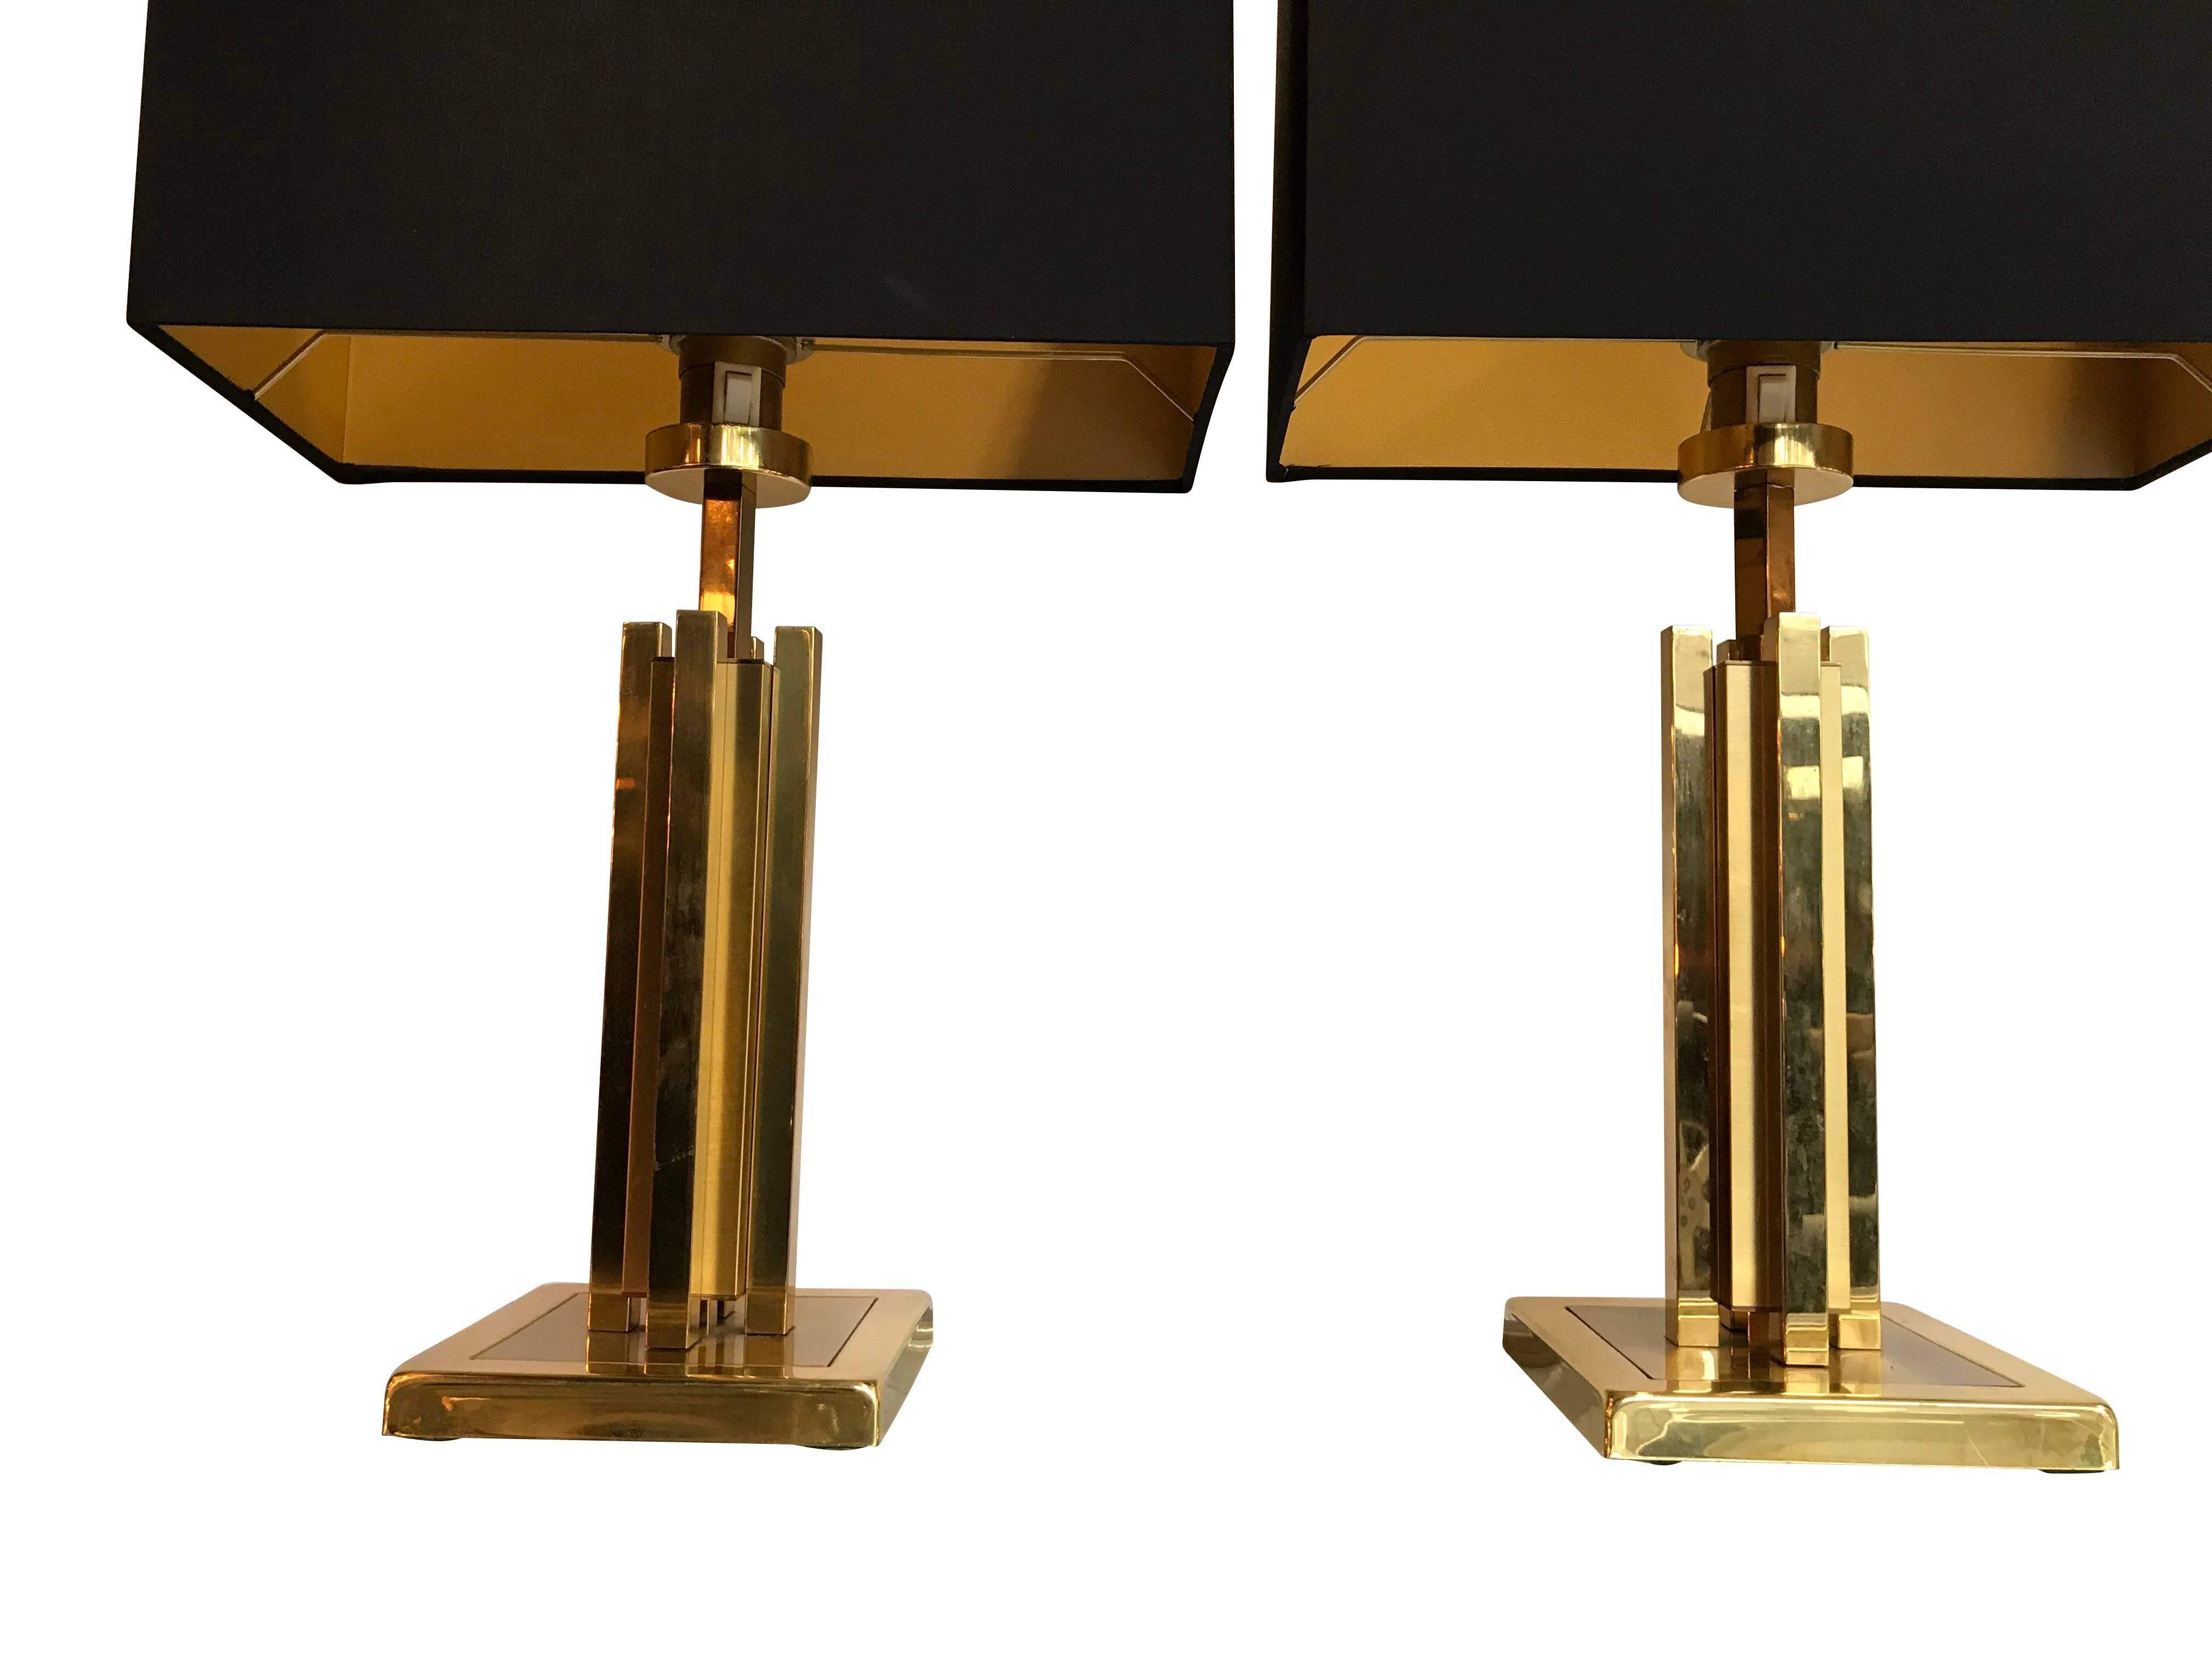 A pair of Willy Rizzo brass table lamps with a combination of polished and mat brass finish, with new bespoke black silk shades with gold interiors. Re wired with antique gold cord flex and PAT tested.